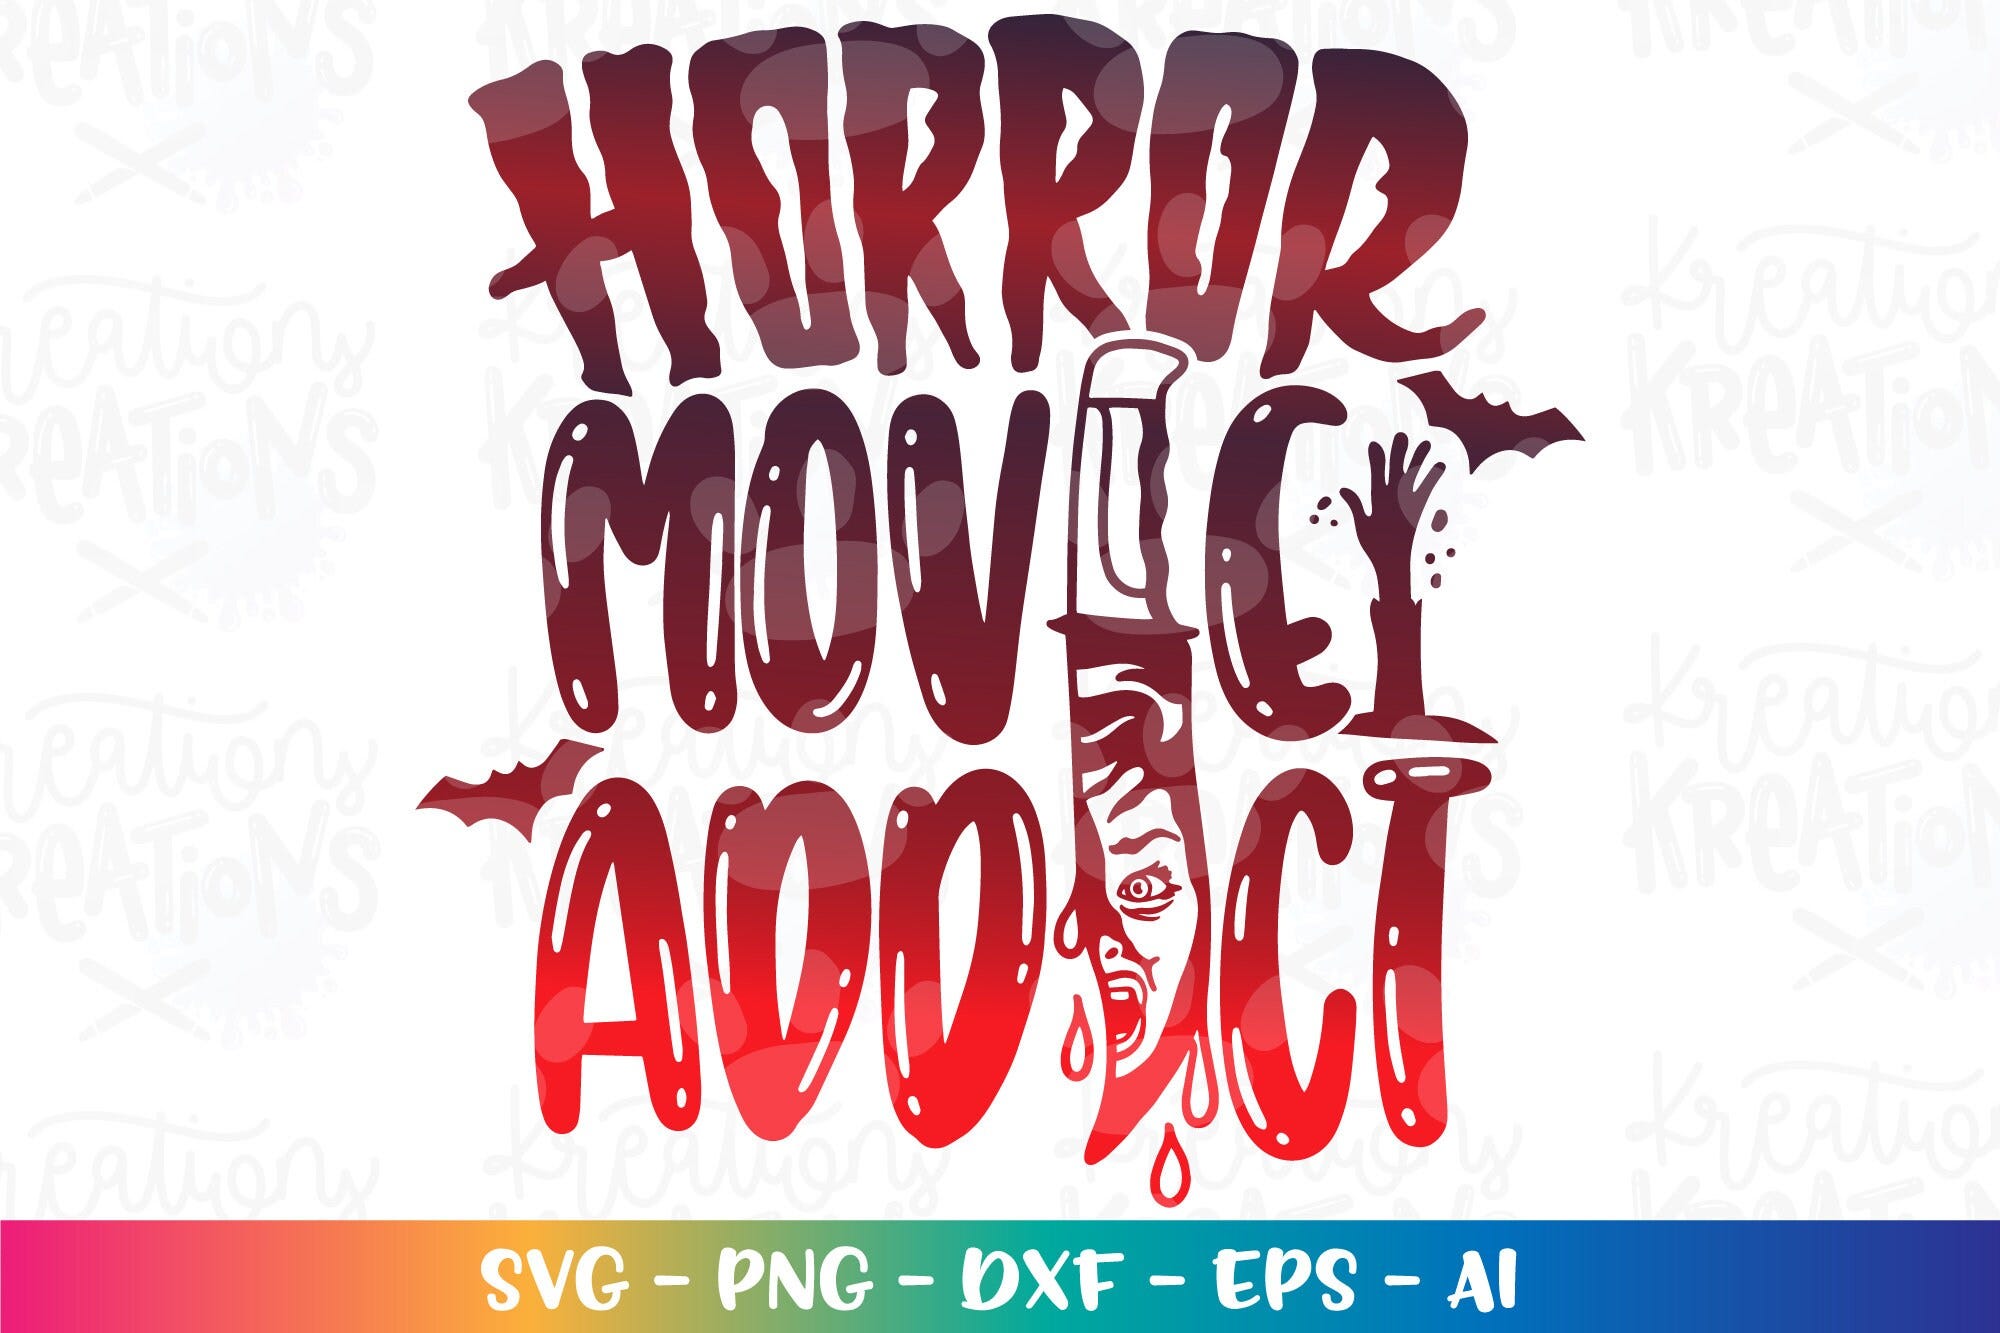 Horror Movie Addict svg True crime junkie Crime Scene bloody Crime show tv halloween print iron on cut file Cricut Download vector png dxf